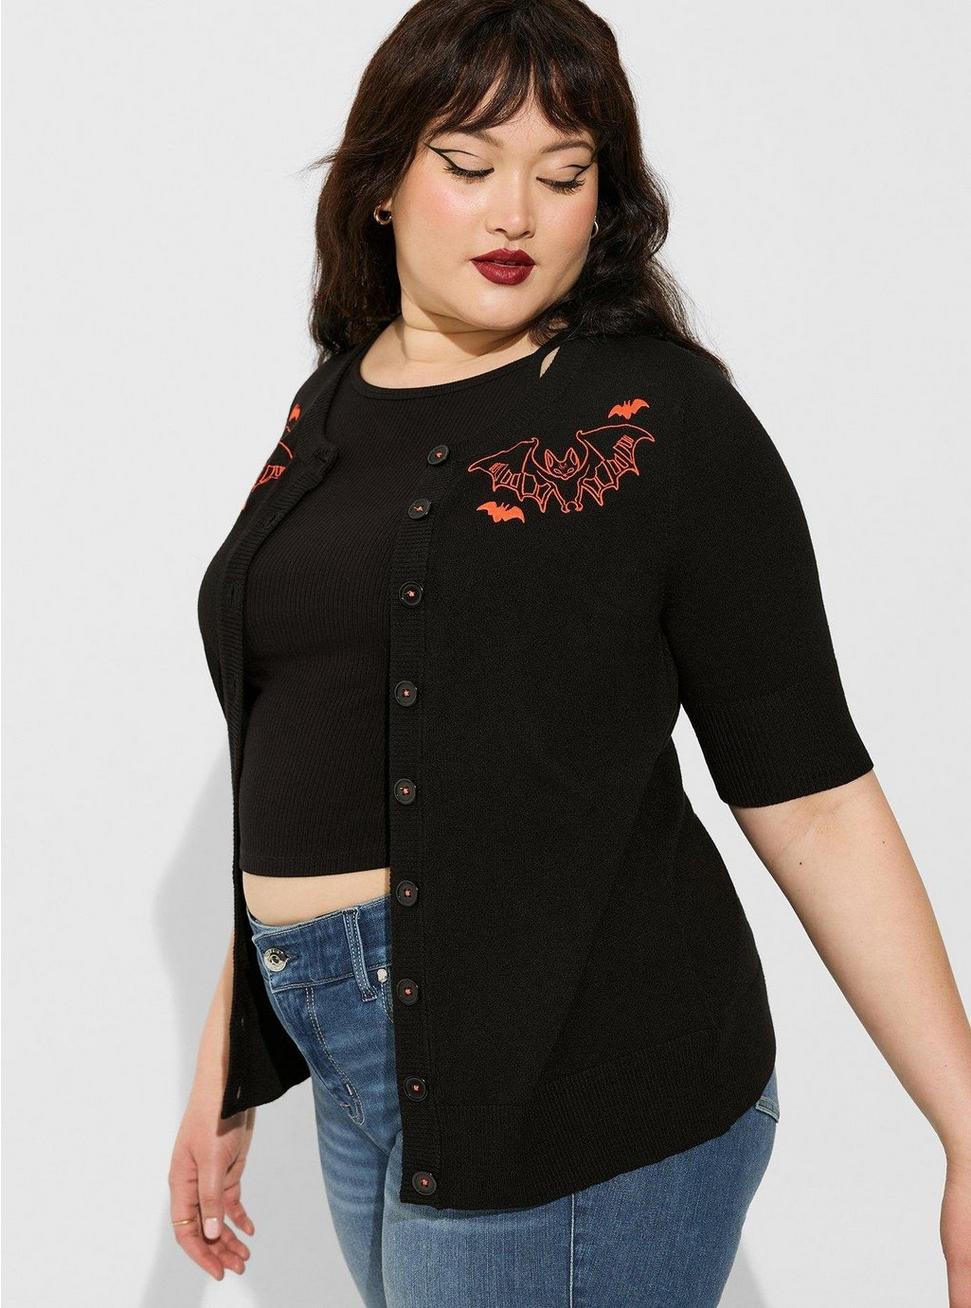 Fitted Embroidered Cardigan, DEEP BLACK, hi-res